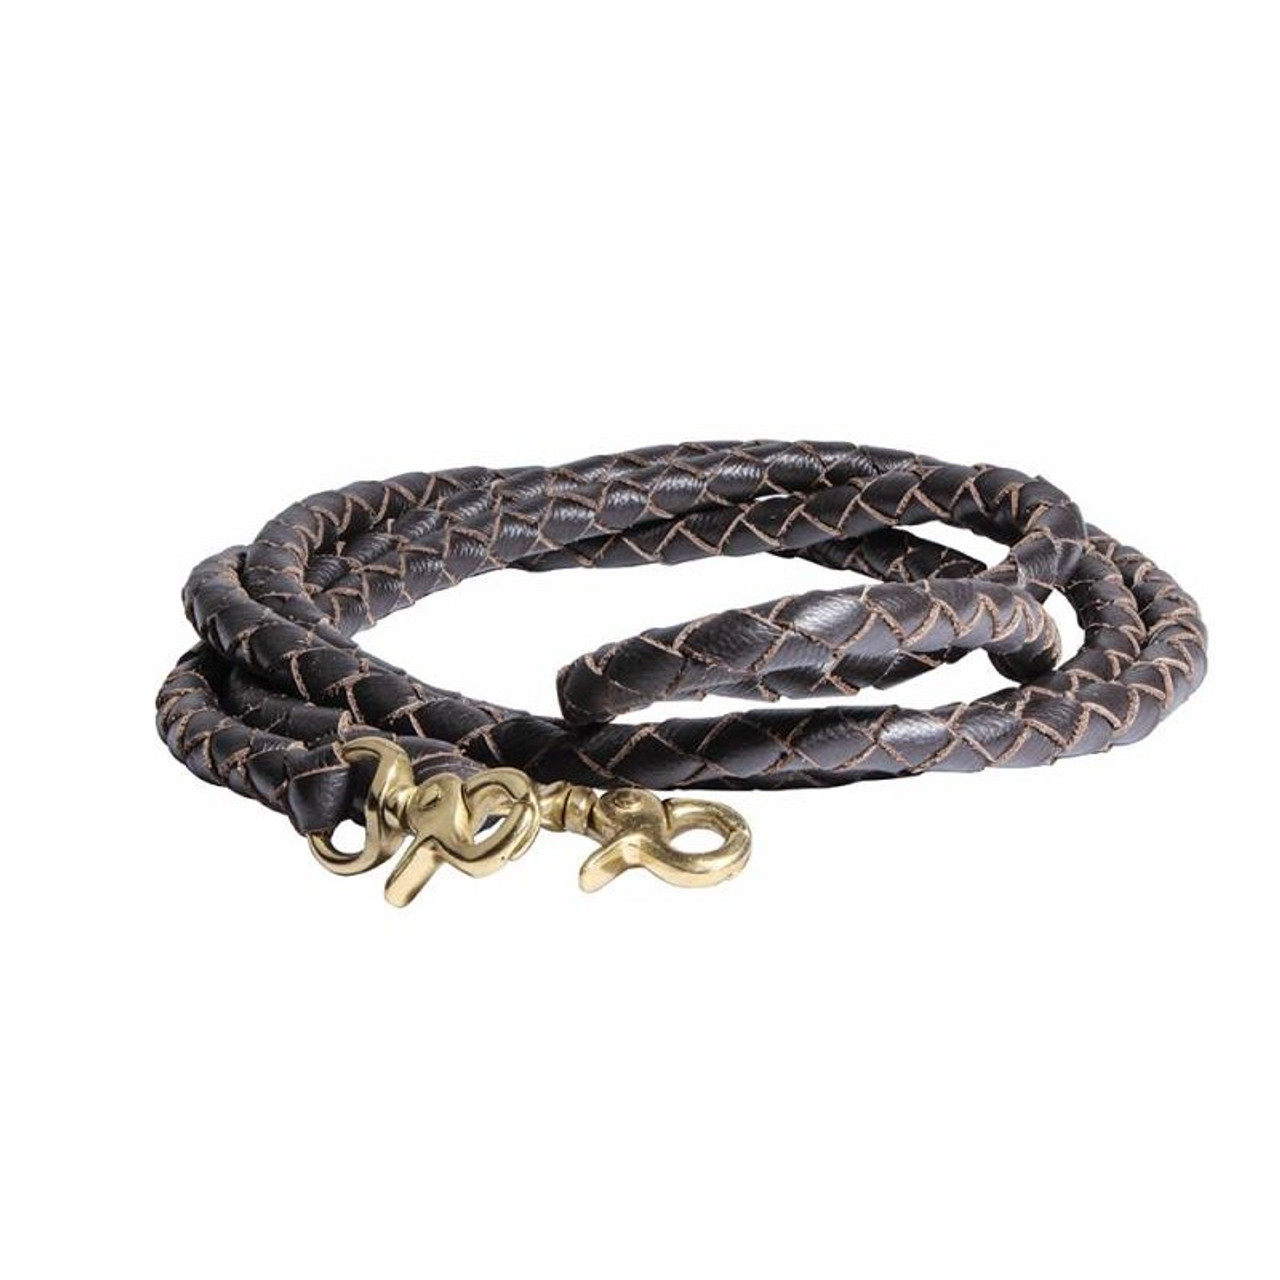 Professional's Choice Schutz Collection Braided Leather Roping